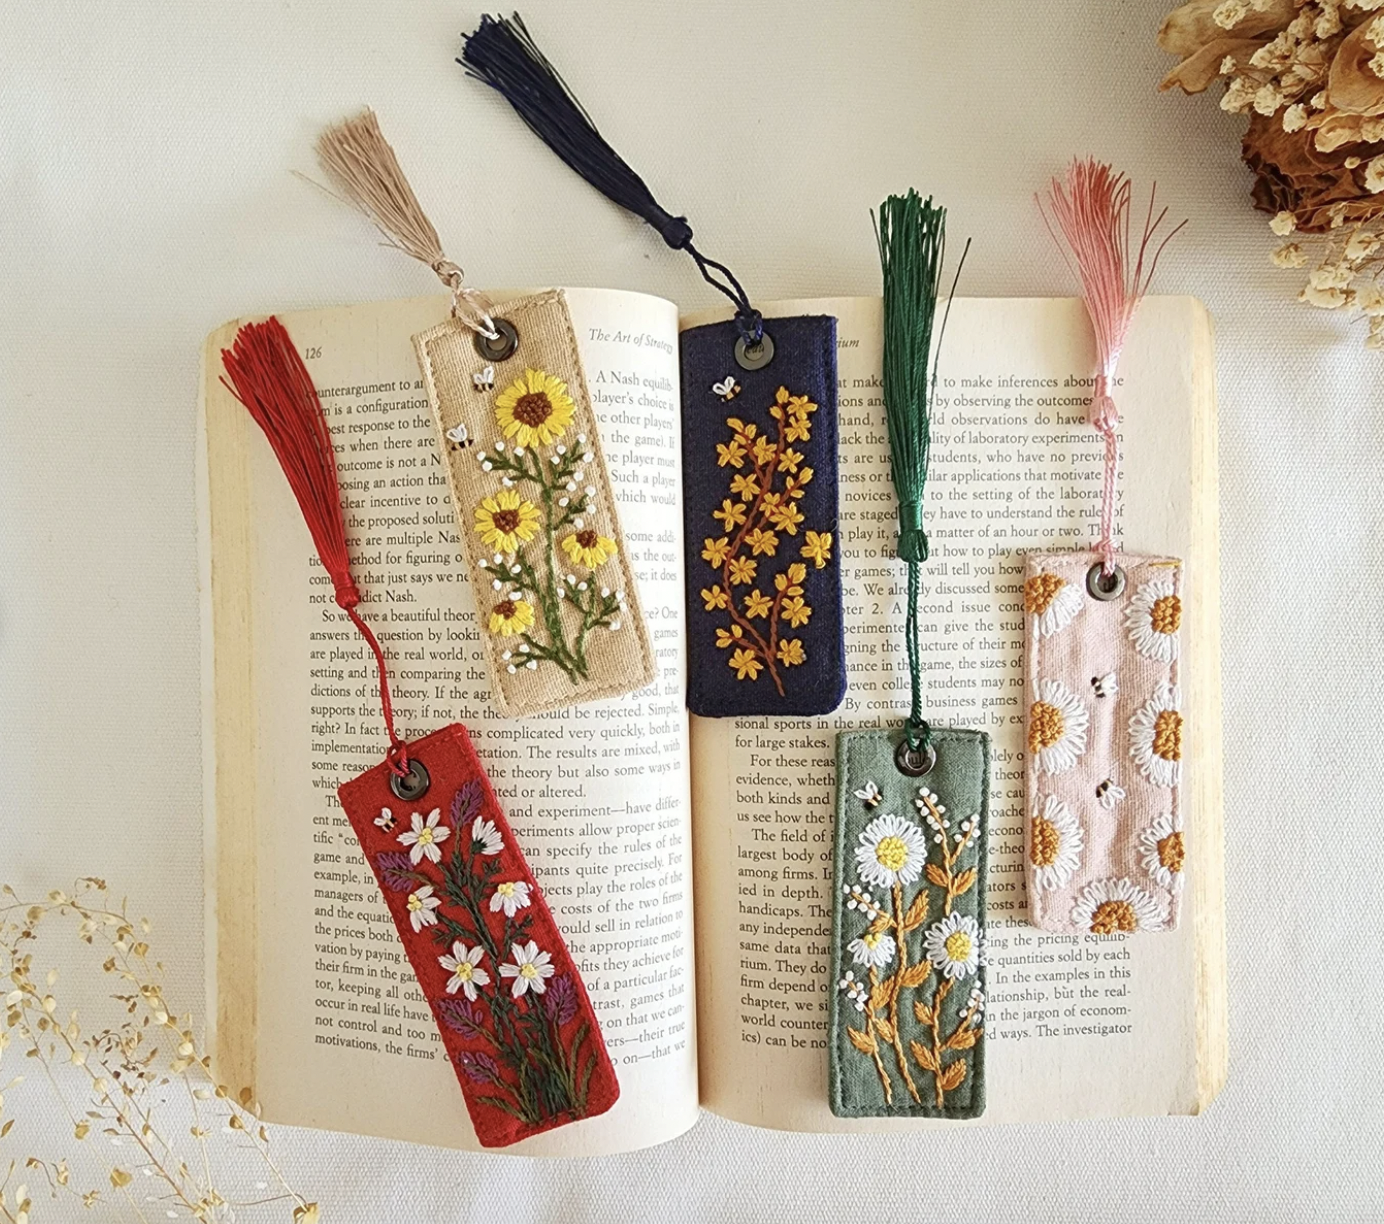 Image of five tasseled bookmarks with hand-embroidered floral designs displayed on a book